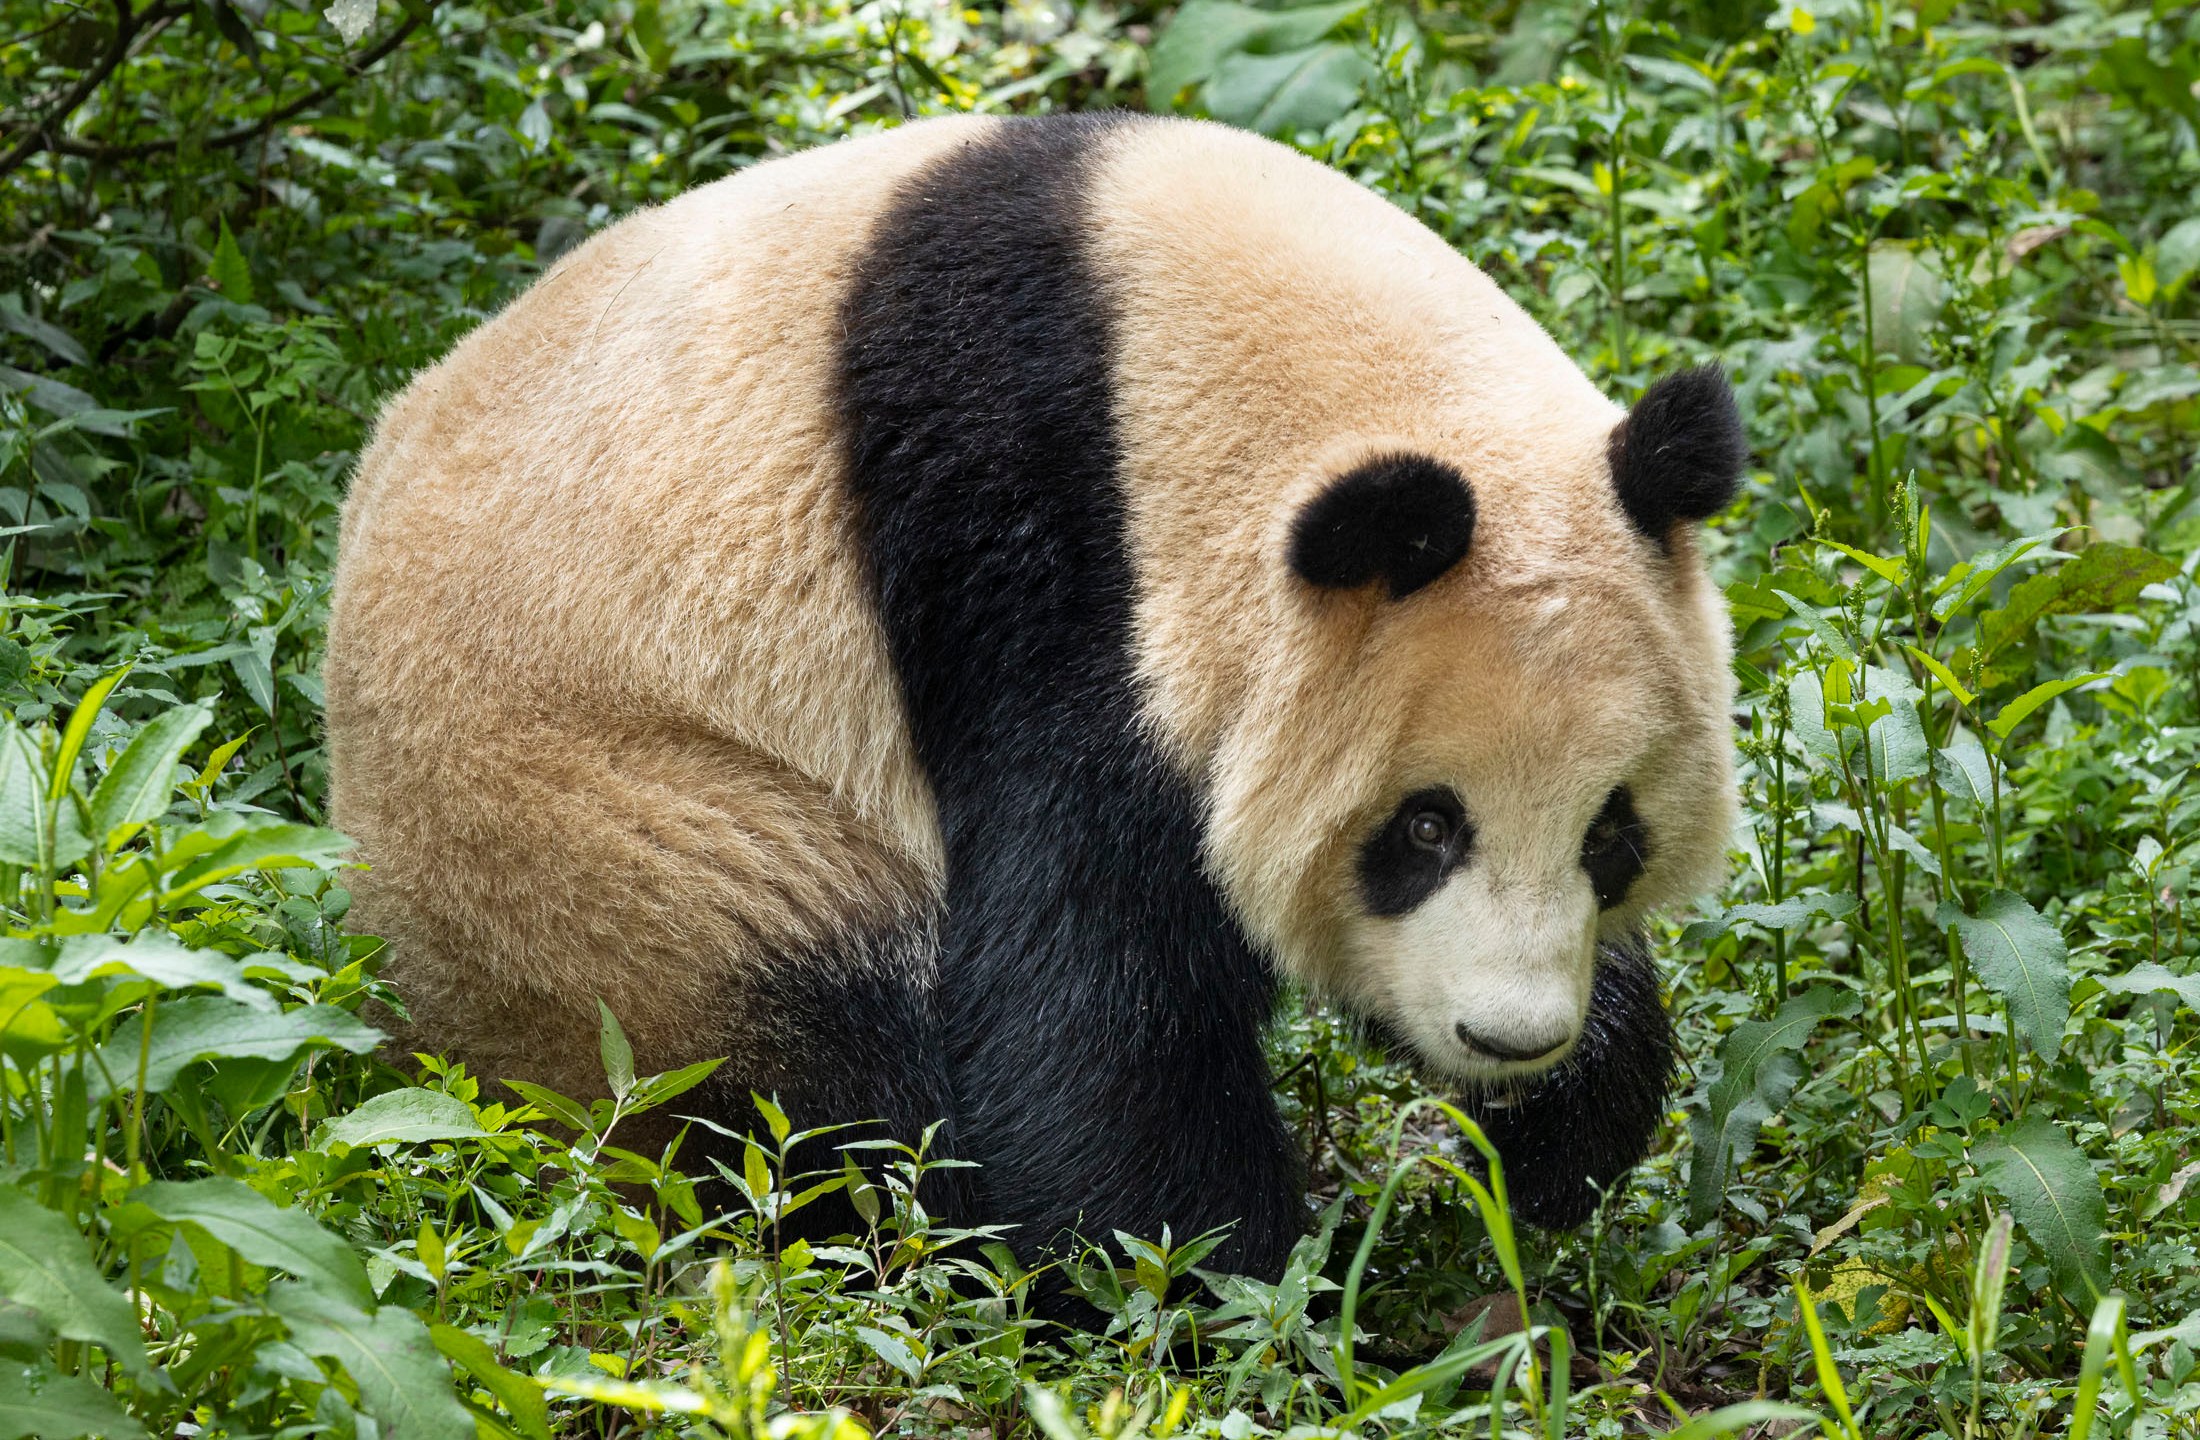 This photo released by the San Diego Zoo shows giant panda Xin Bao on Thursday, April 25, 2024, in the Sichuan province of China. A pair of giant pandas will soon make the journey from China to the U.S., where they will be cared for at the San Diego Zoo as part of an ongoing conservation partnership between the two nations, officials said Monday, April 29. (Ken Bohn/San Diego Zoo via AP)